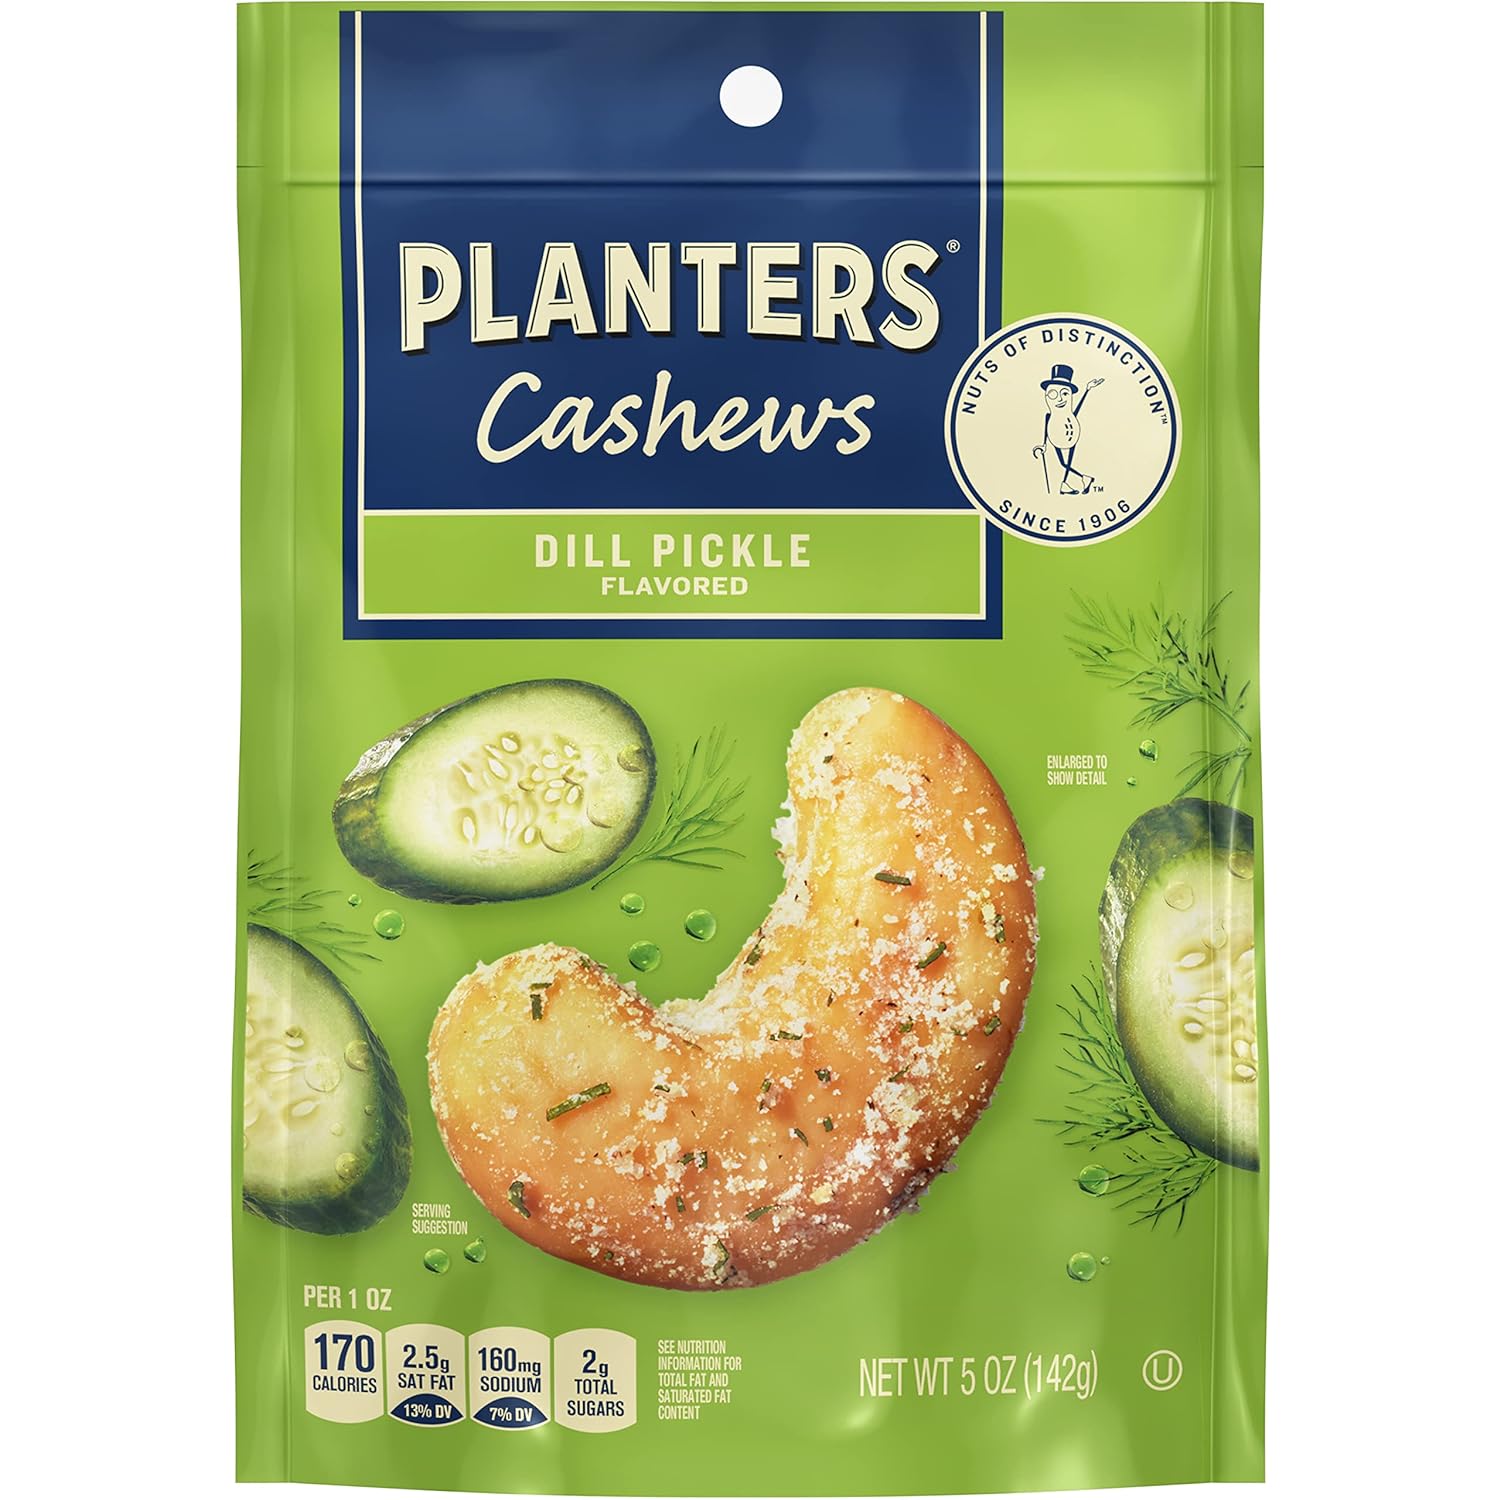 PLANTERS Whole Cashews Dill Pickle Flavored, Party Snacks, 5 Oz Bag